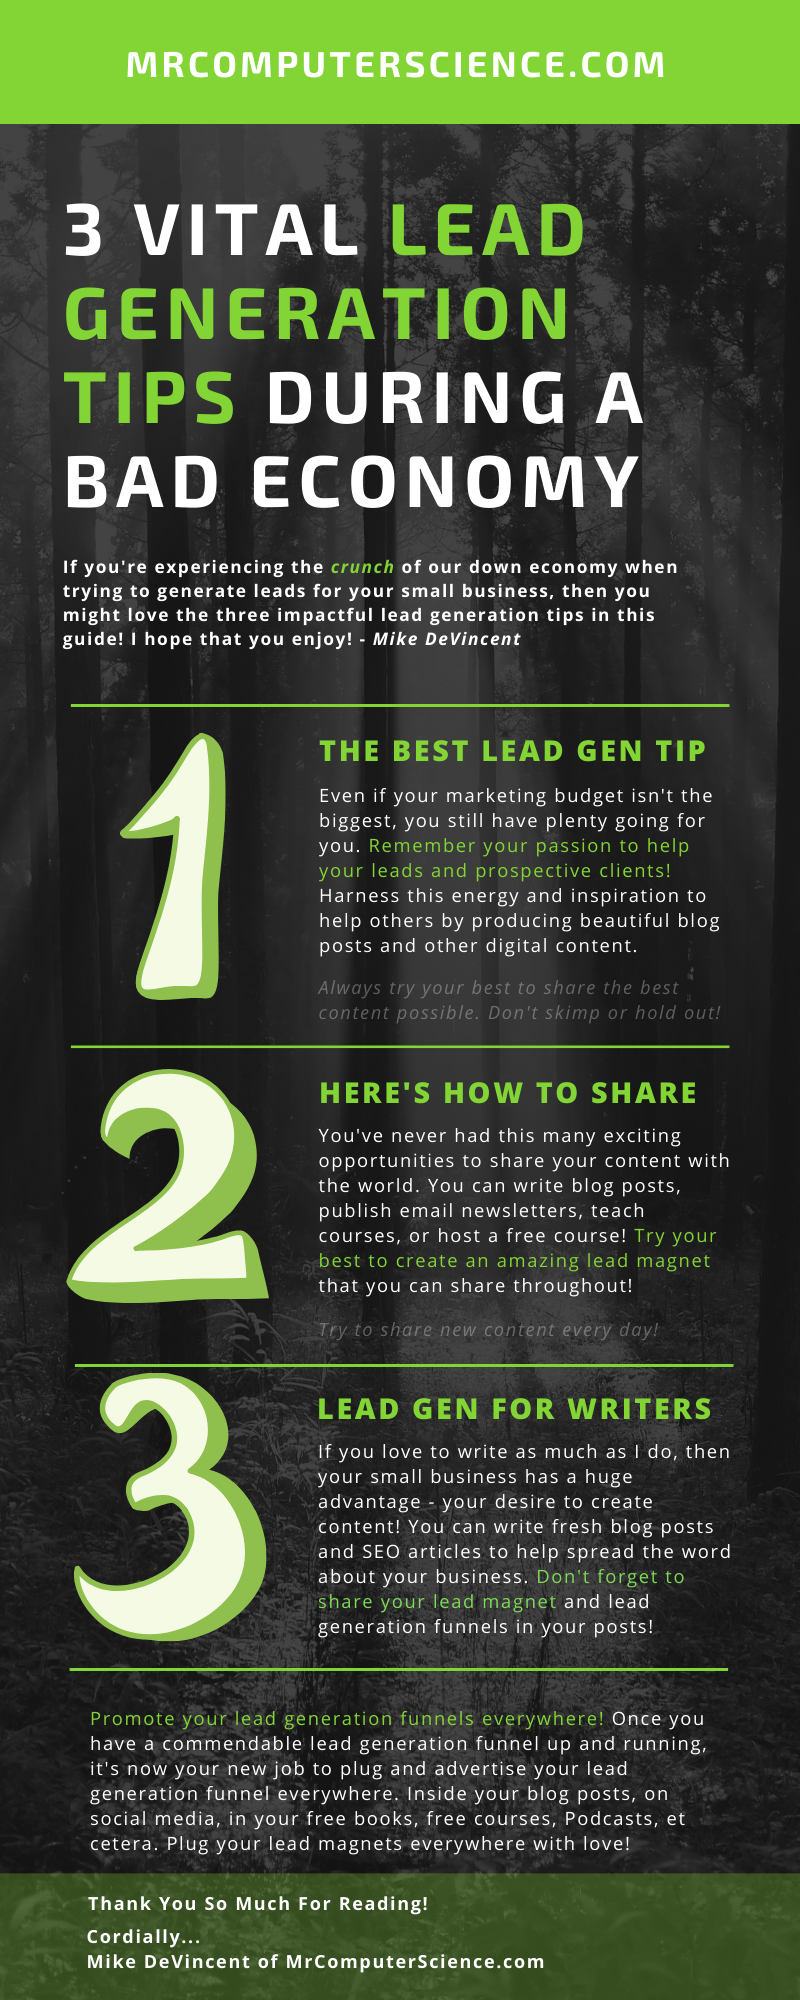 MrComputerScience.com Infographic - 3 Vital Lead Generation Tips During A Down Economy